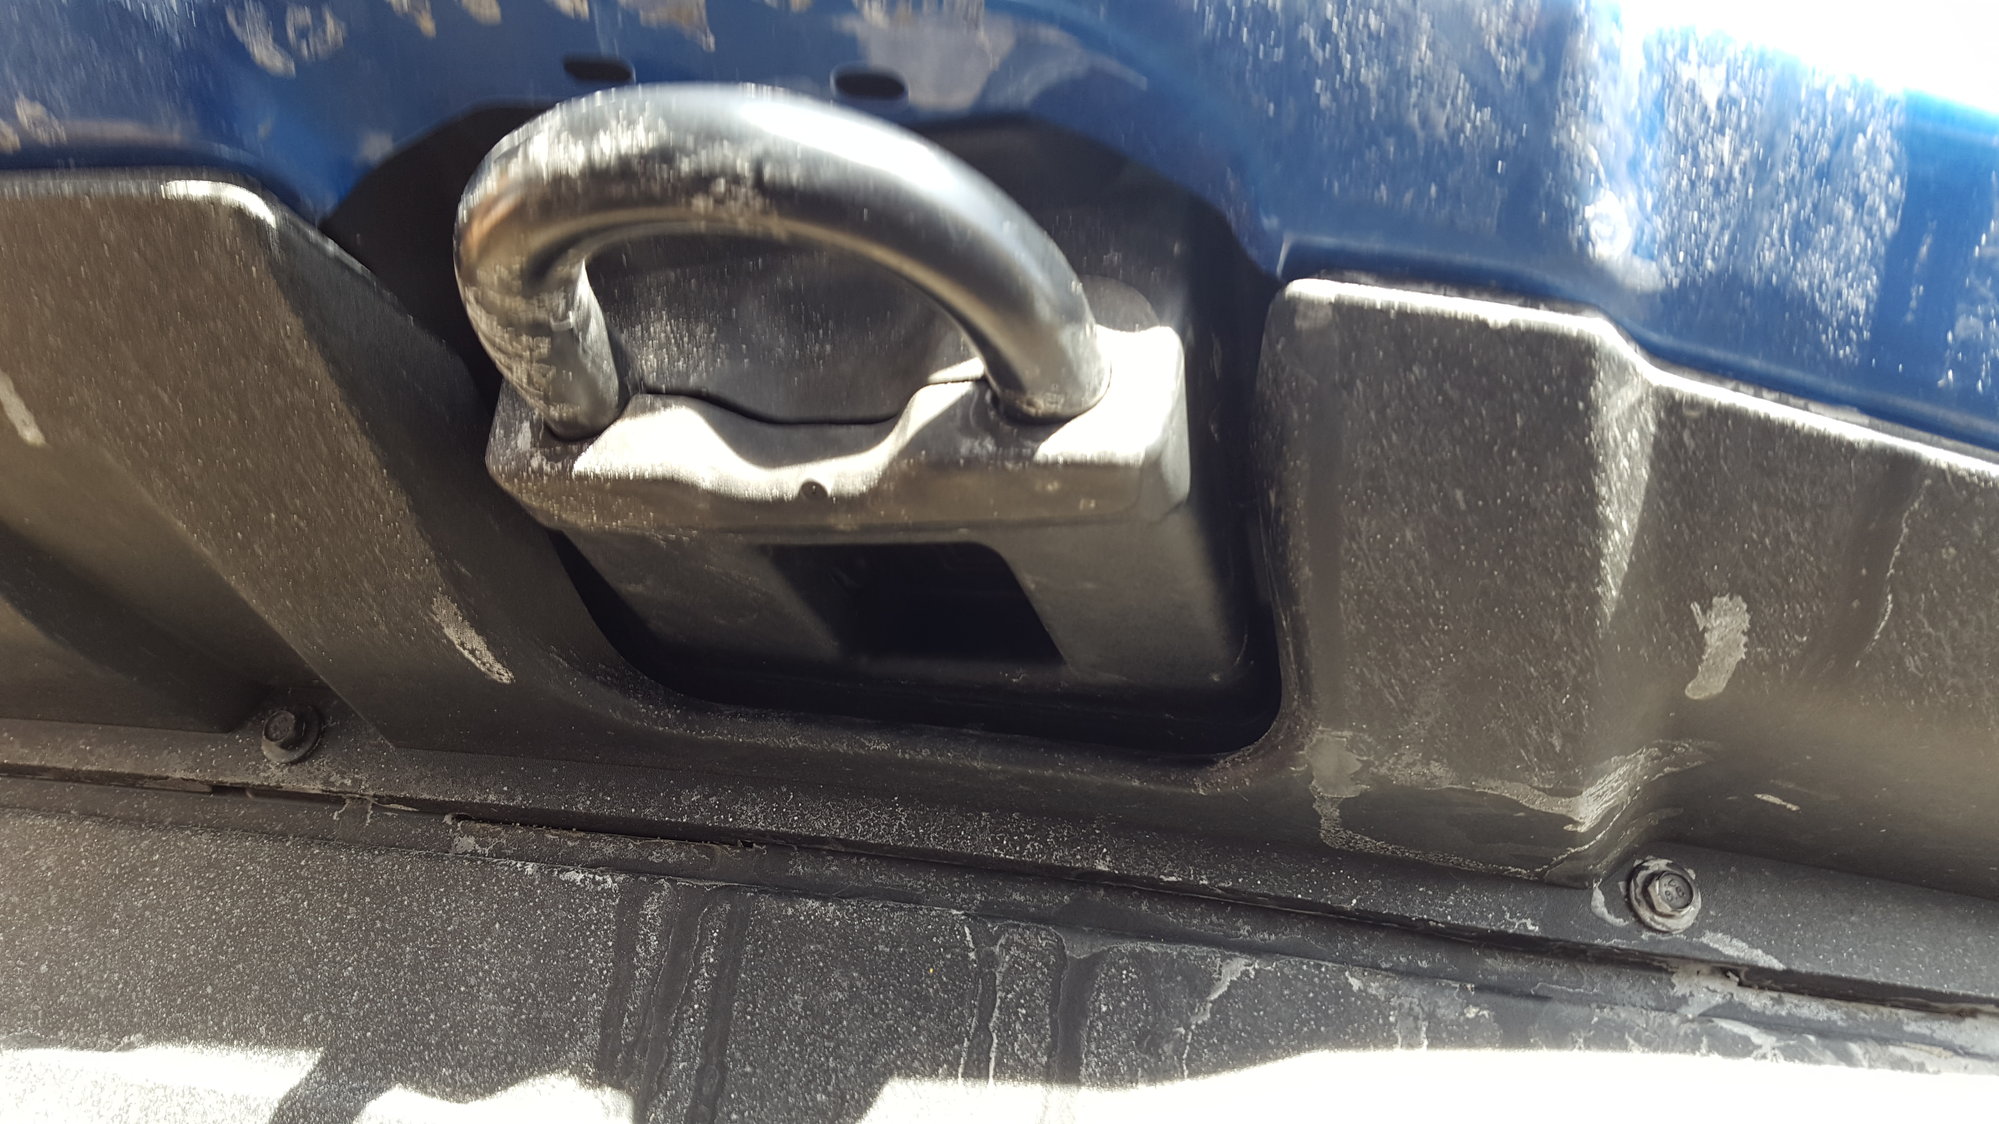 Tow Hook Cover Removal - Ford F150 Forum - Community of Ford Truck Fans